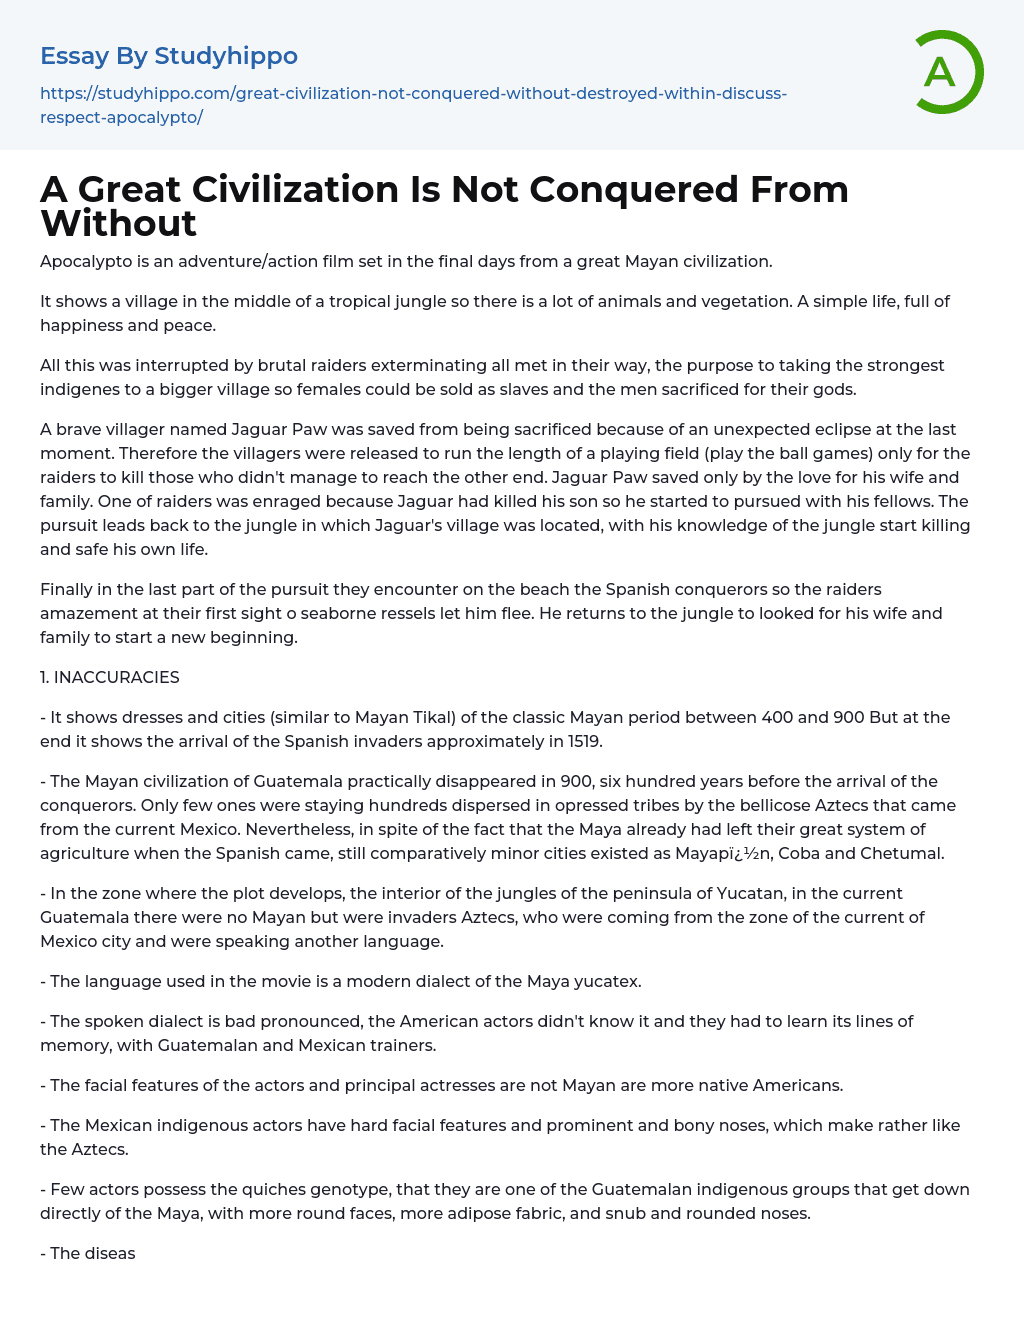 A Great Civilization Is Not Conquered From Without Essay Example